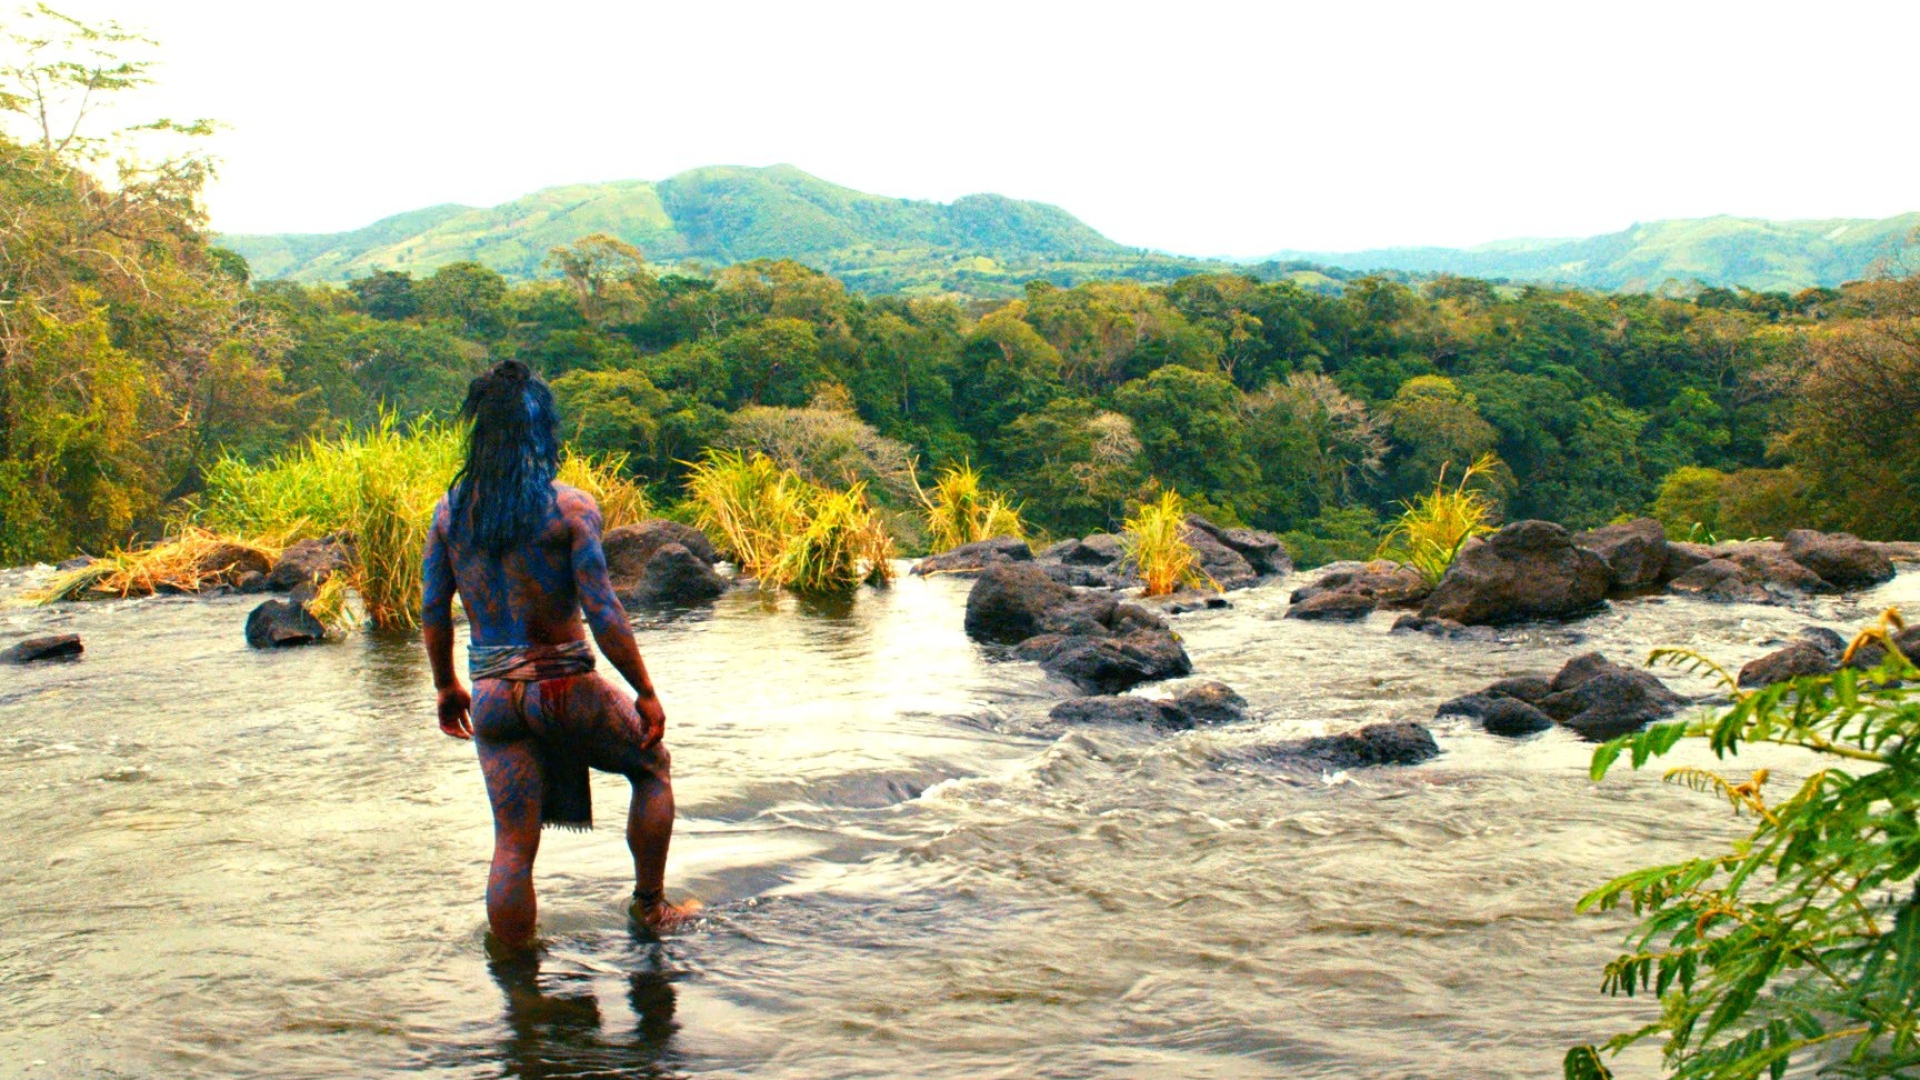 Apocalypto: The violent film, set during the collapse of the Mayan empire. 1920x1080 Full HD Wallpaper.